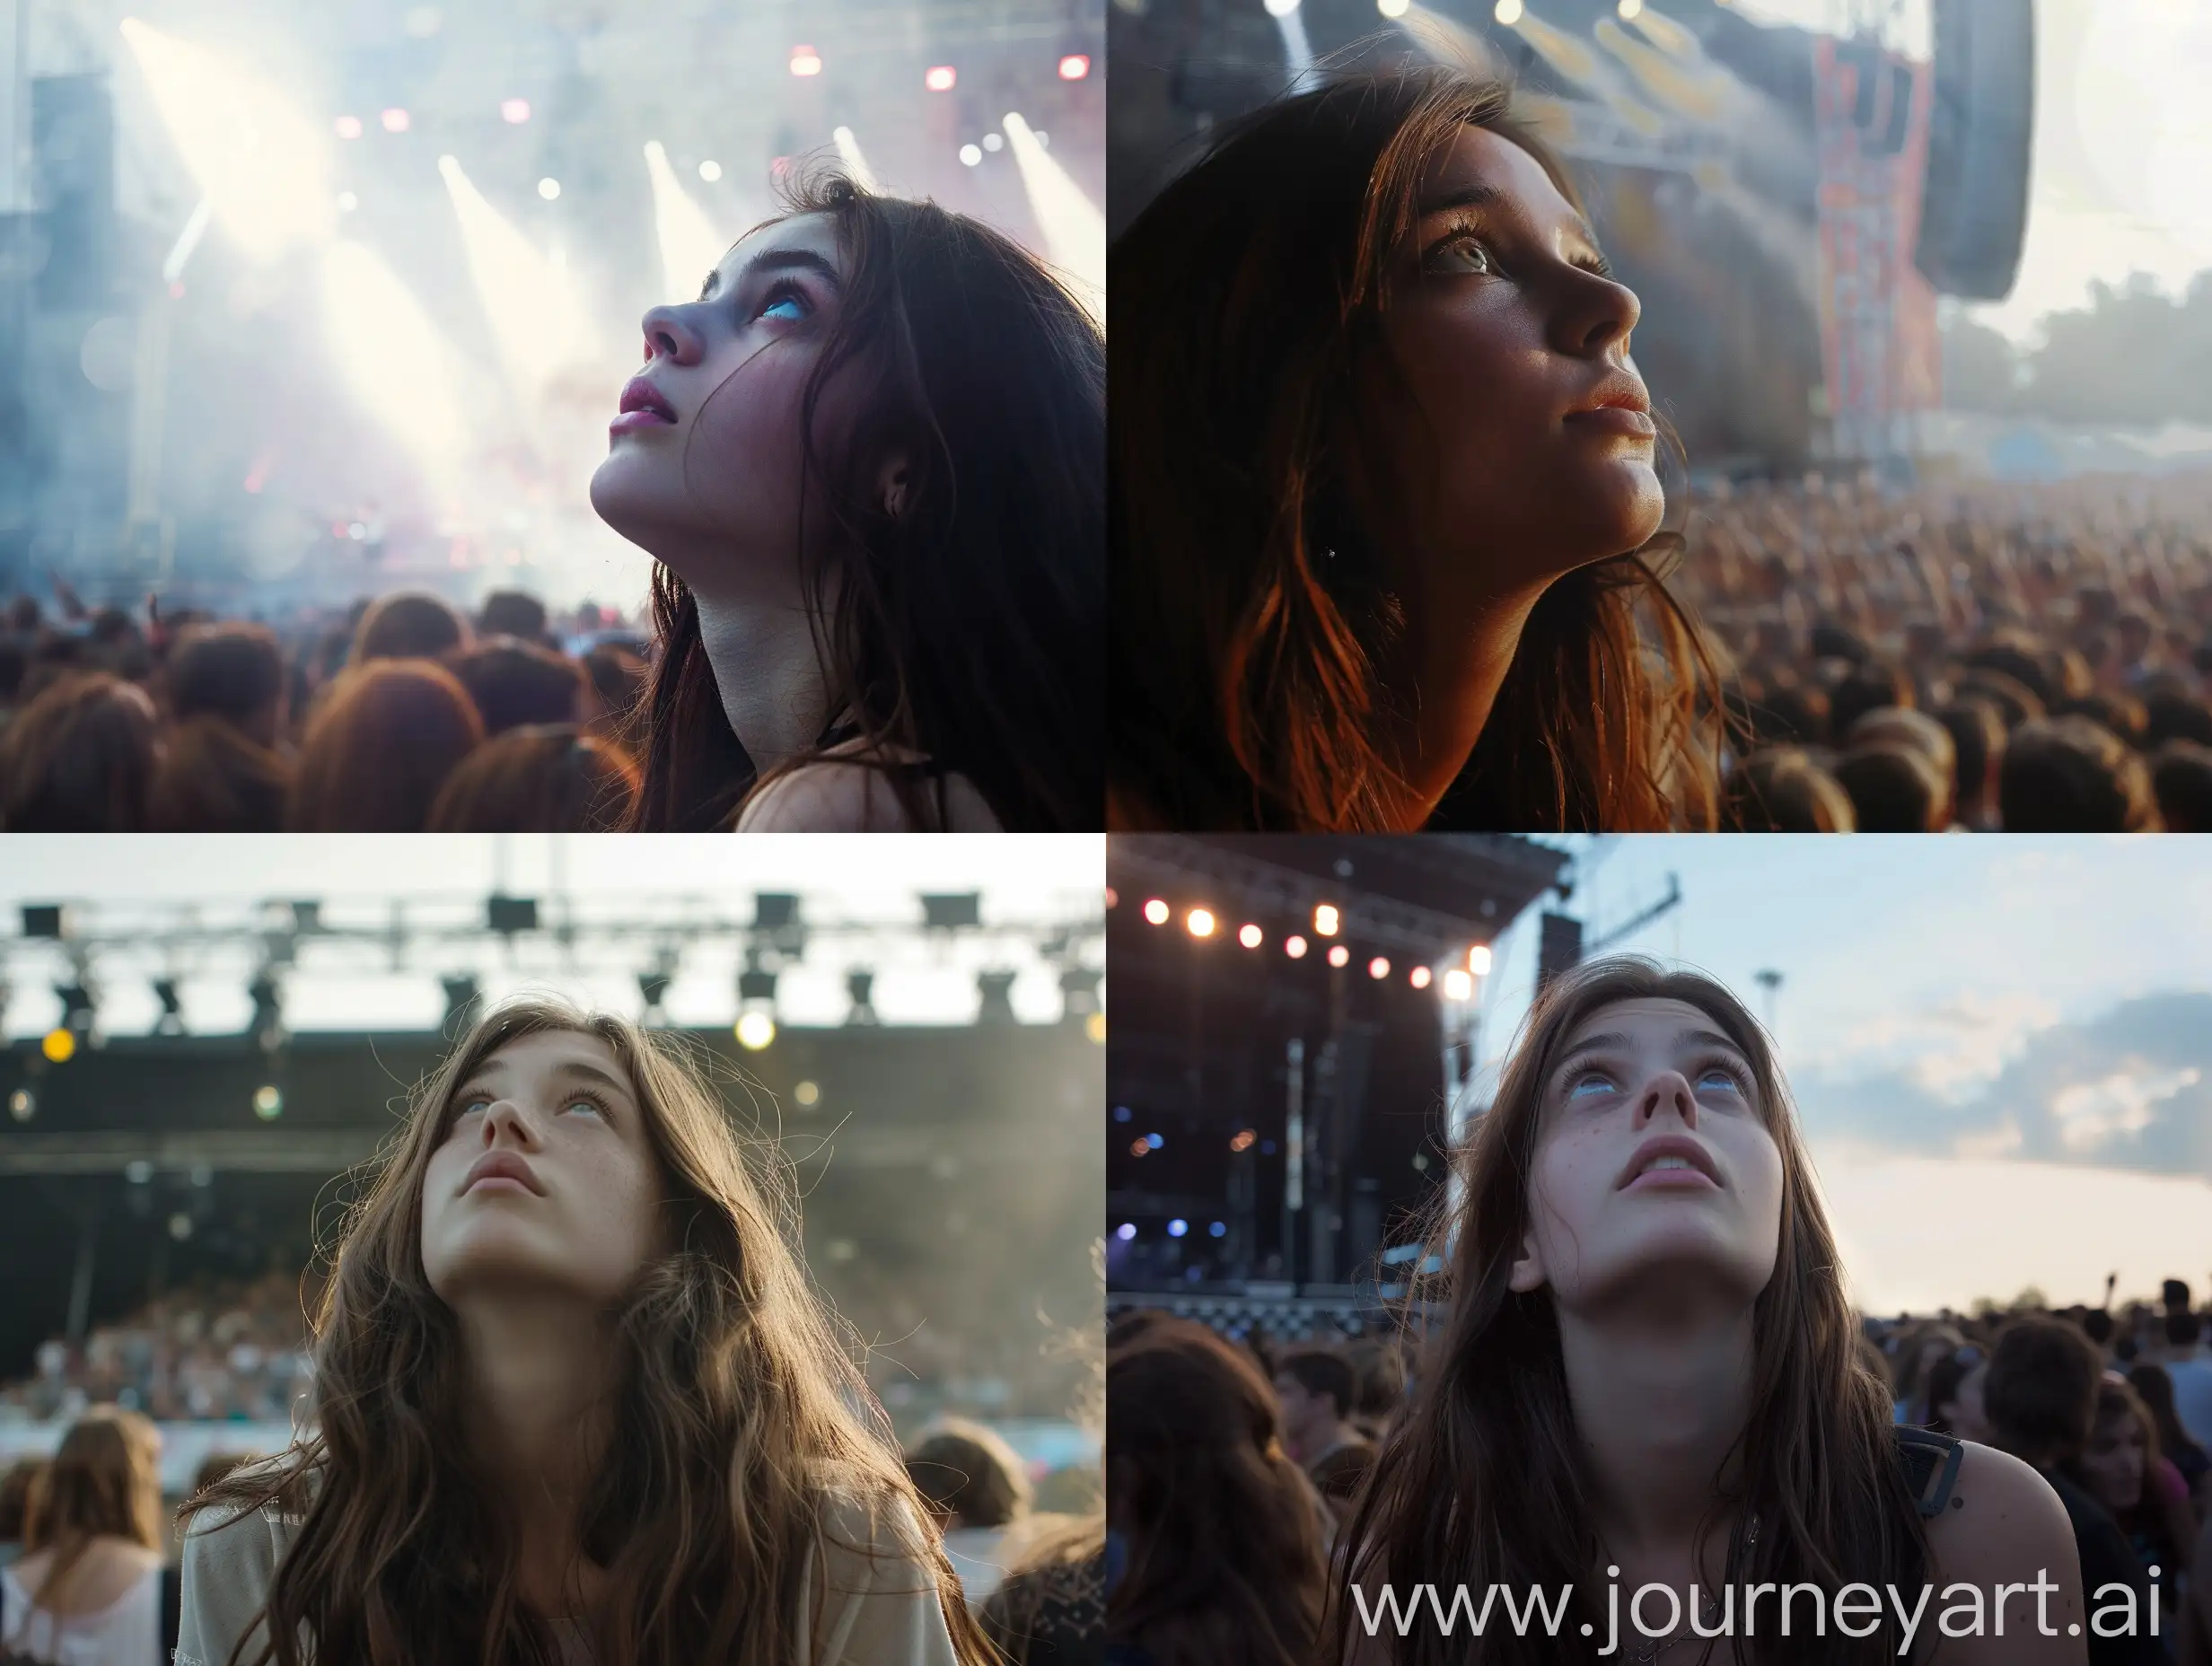 Realistic photograph of a young woman watching a concert. There's a crowd behind her and she's looking up at the stage. The stage is not visible. The woman has long brown hair and pale skin